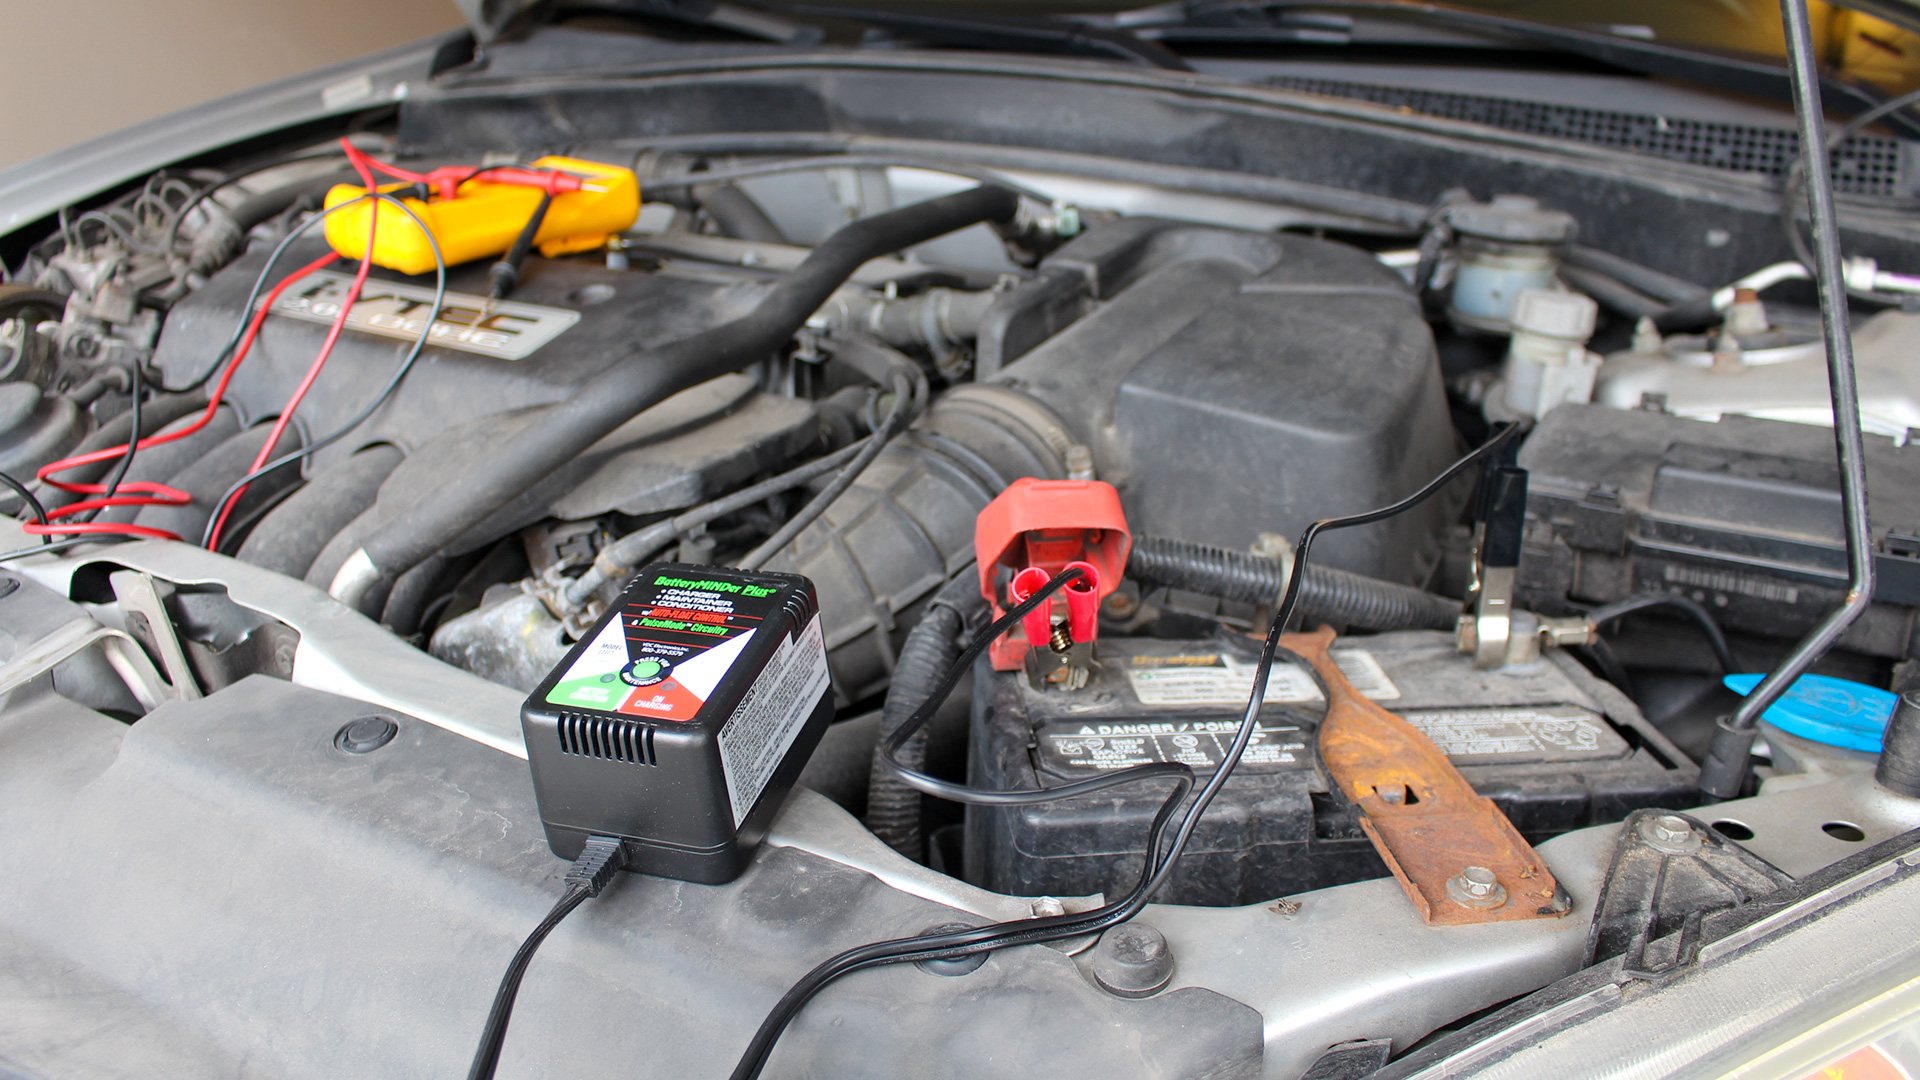 https://www.thedrive.com/uploads/2019/09/15/how-to-charge-a-battery-3.jpg?auto=webp